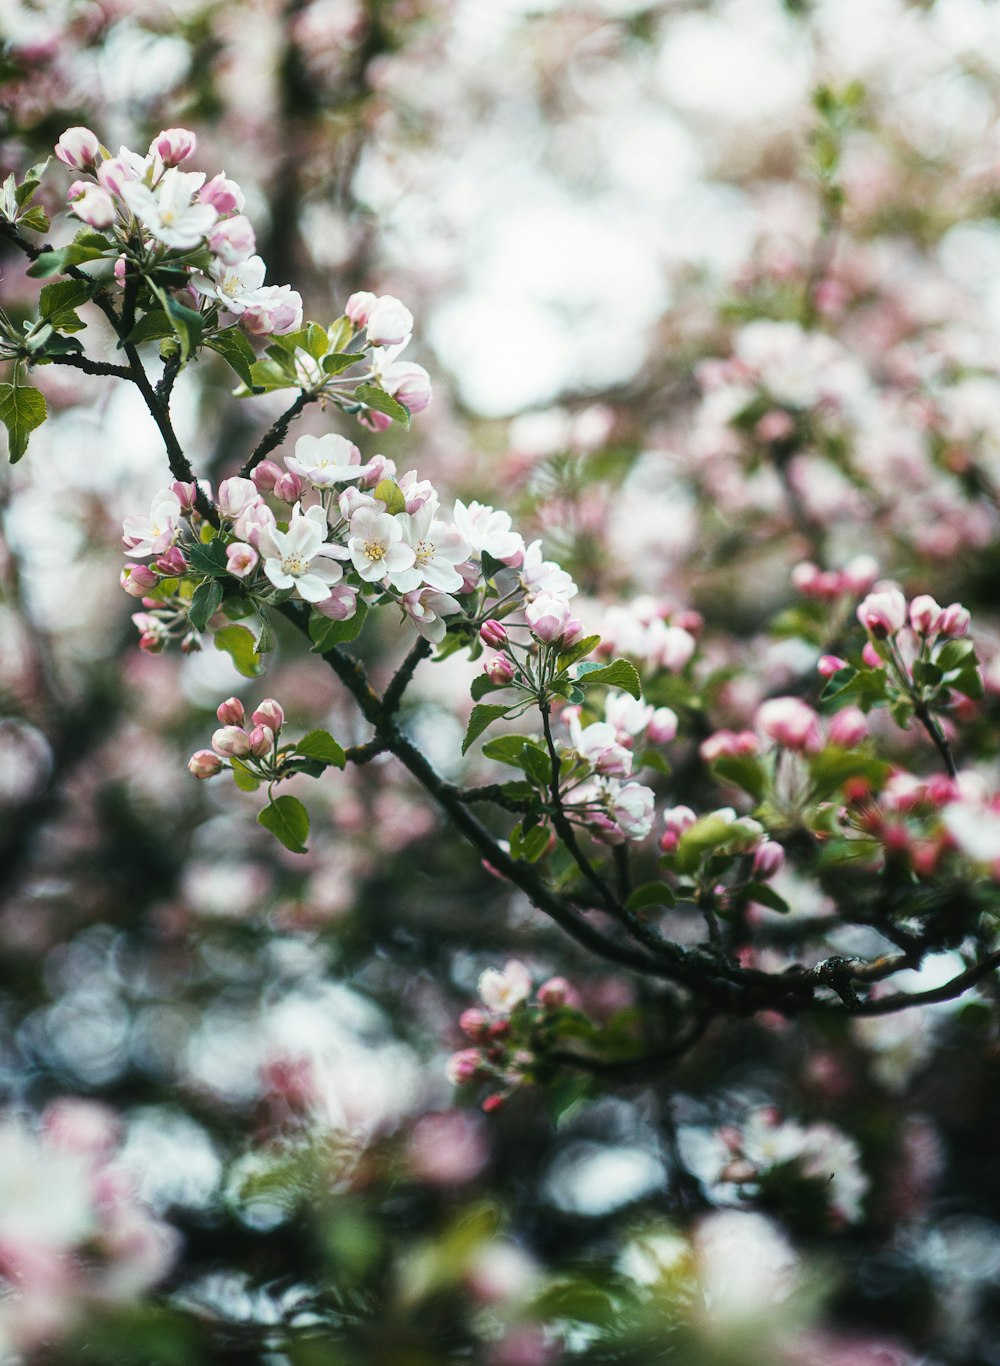 a close up of a tree with pink and white flowers